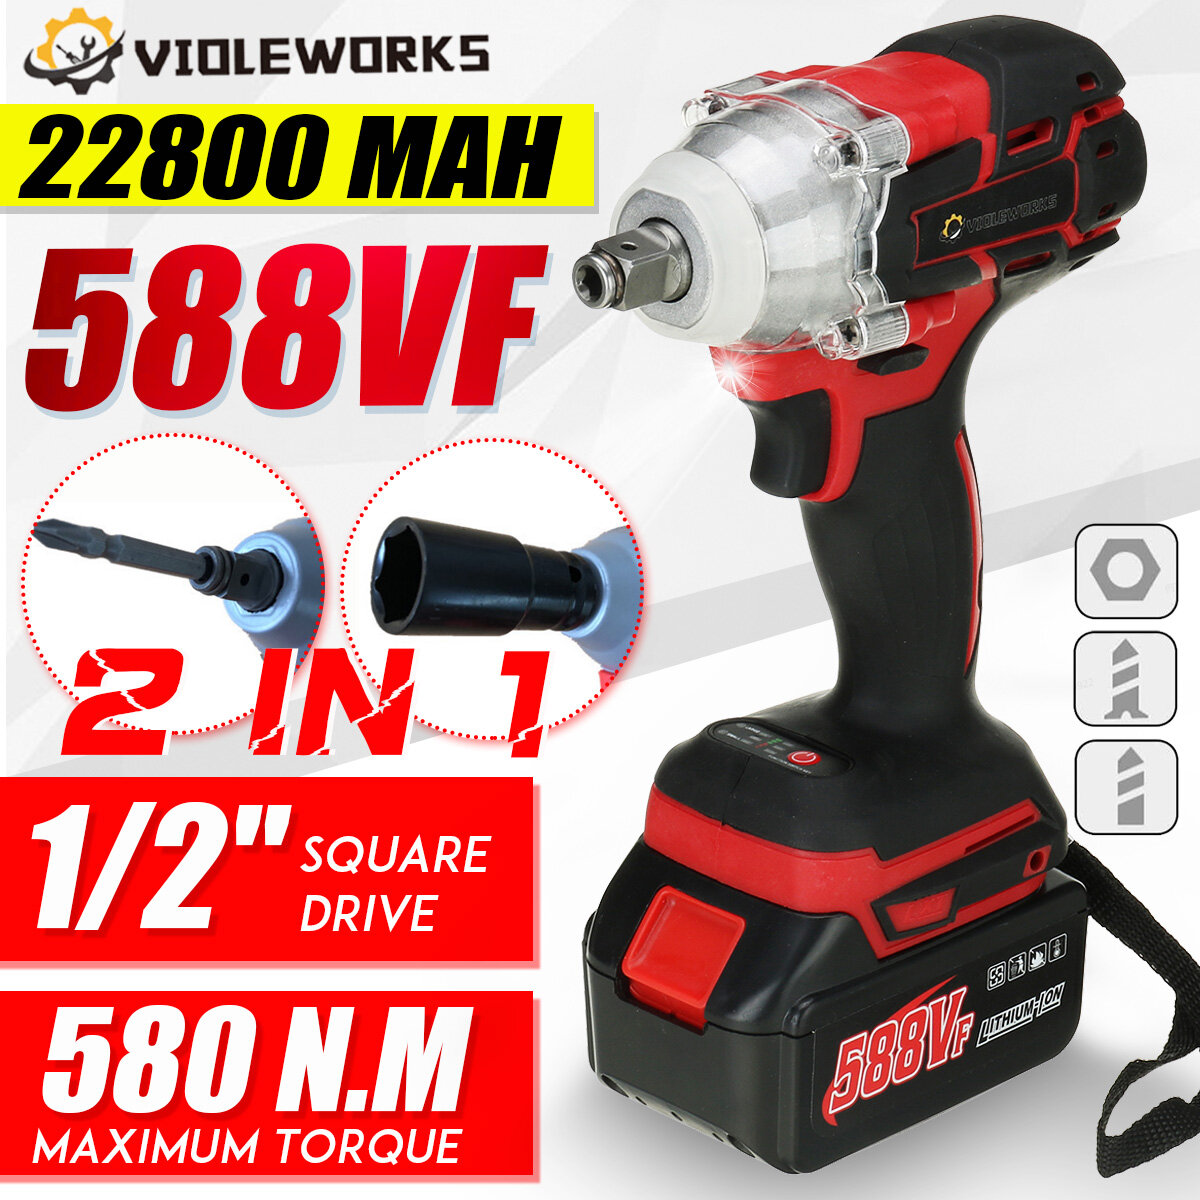 VIOLEWORKS 580N.M 2 in 1 Electric Cordless Brushless Impact Wrench Driver Socket Screwdriver COD